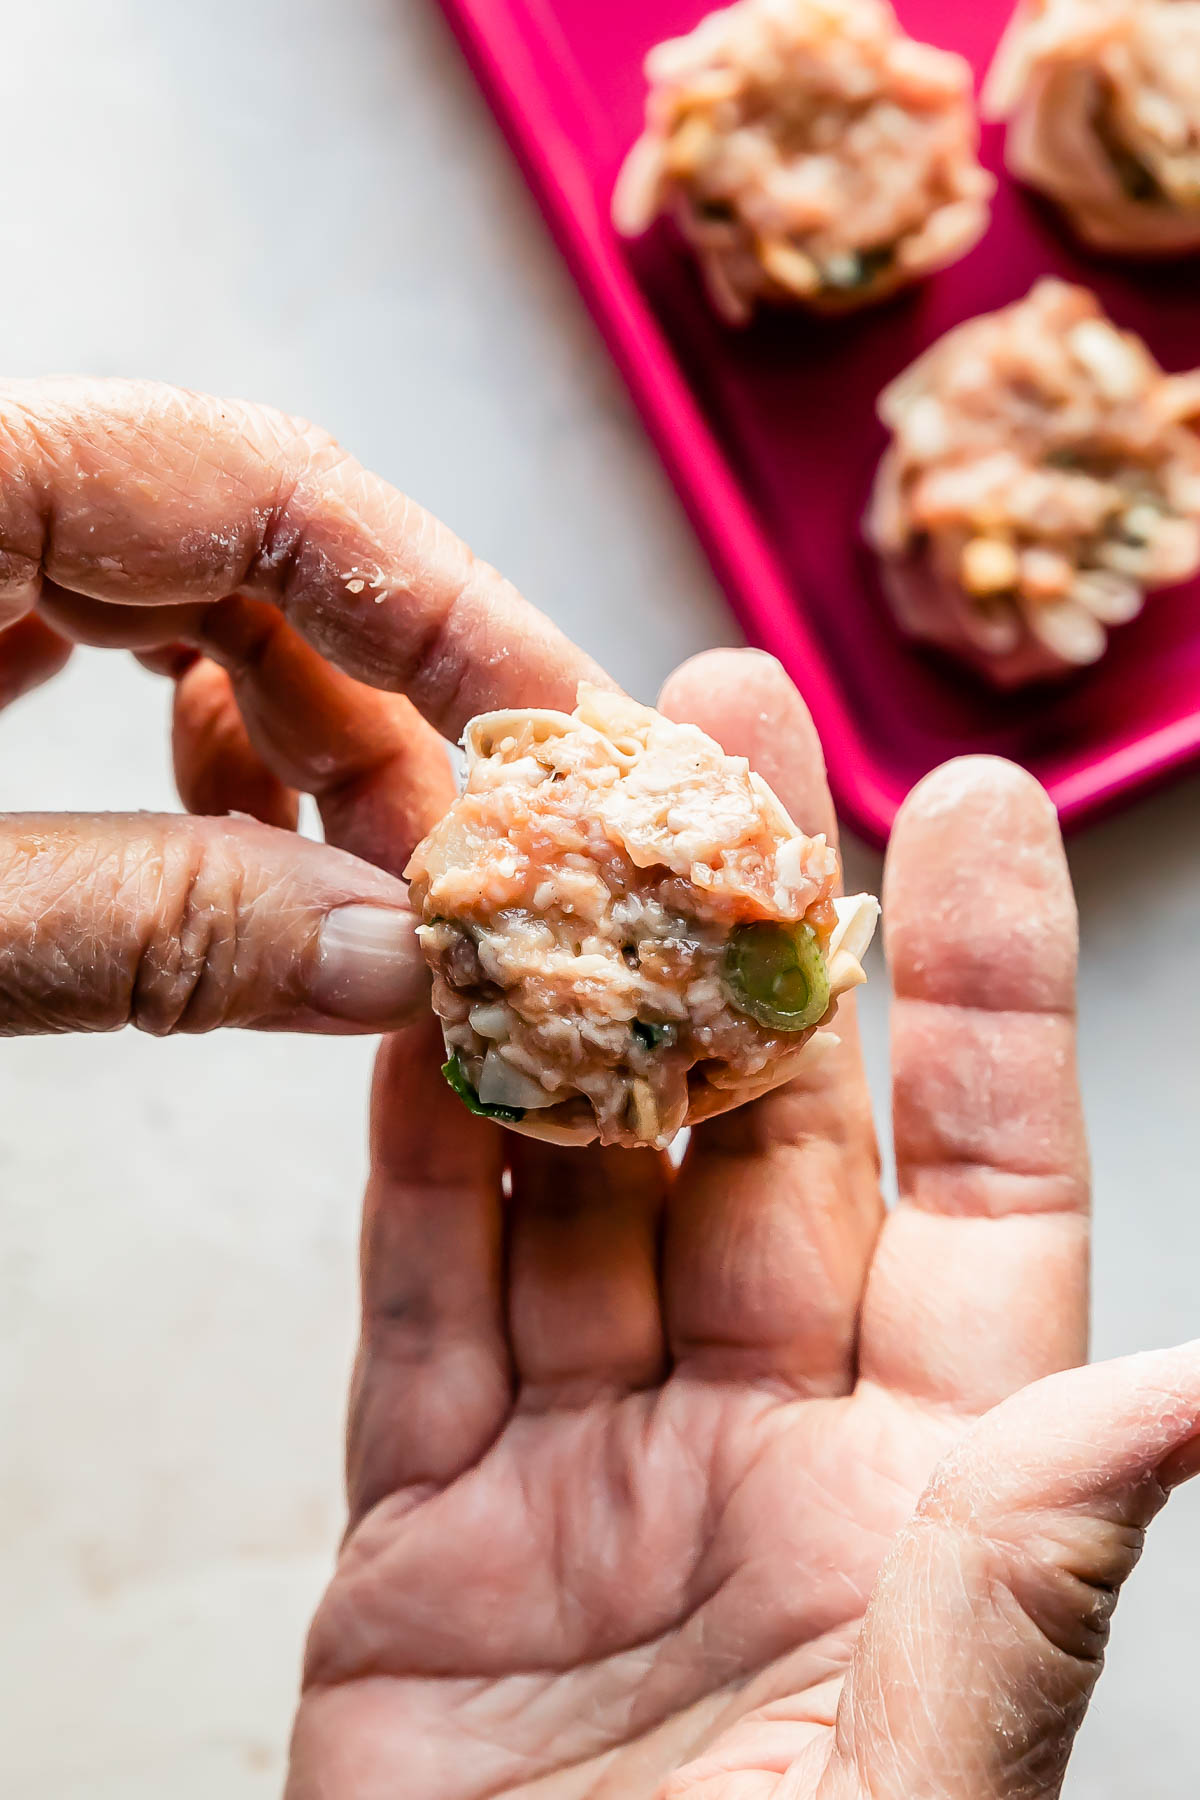 A woman's hands form a shumai dumpling into a purse shape over a creamy white textured surface. A pink baking sheet filled with a few assembled shumai dumplings rests atop the surface.